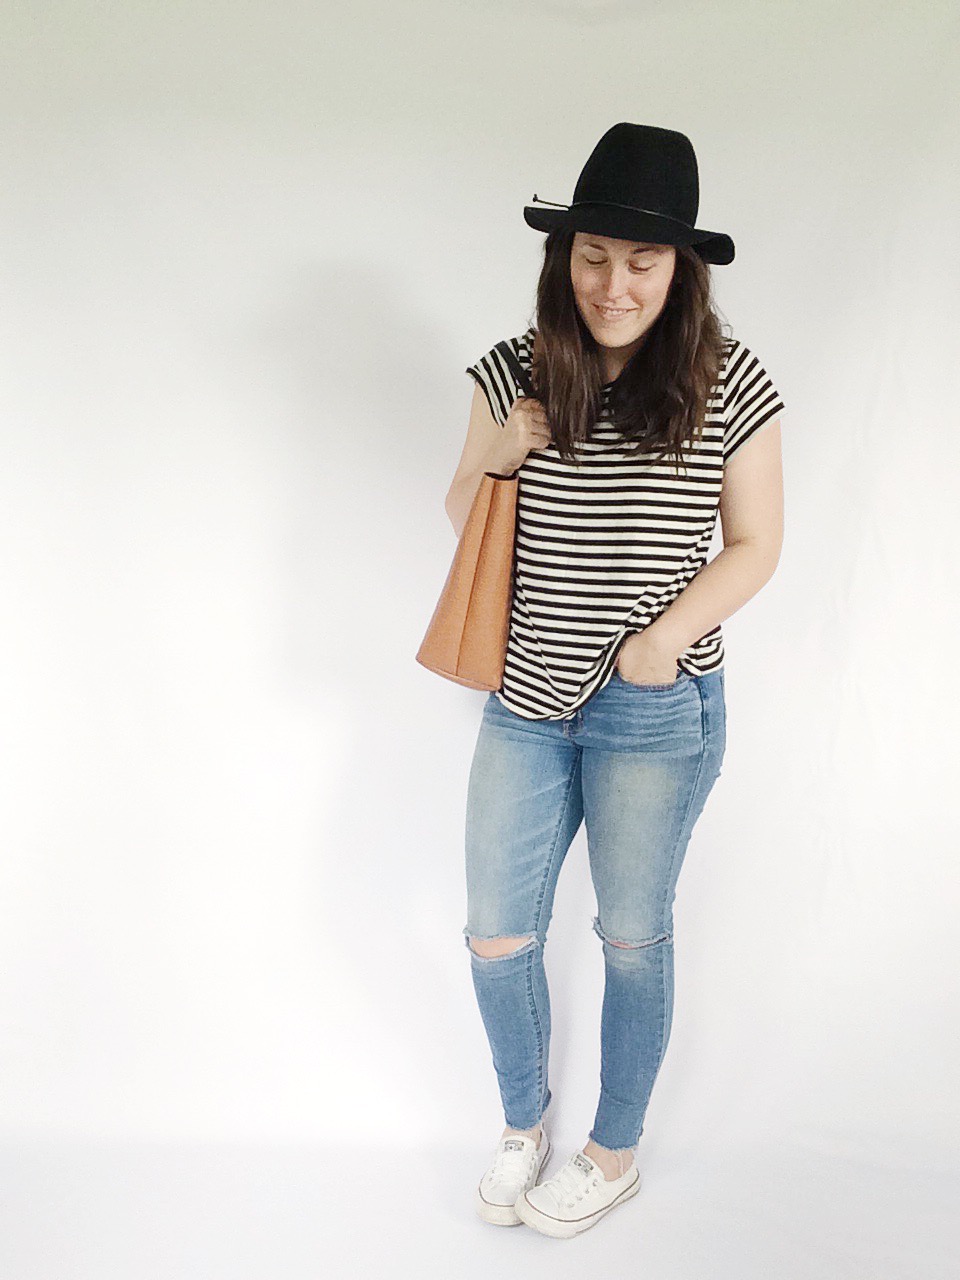 Use 10 pieces to create 10 unique everyday looks via thelovelylauralife.com | striped tee, light wash denim + converse